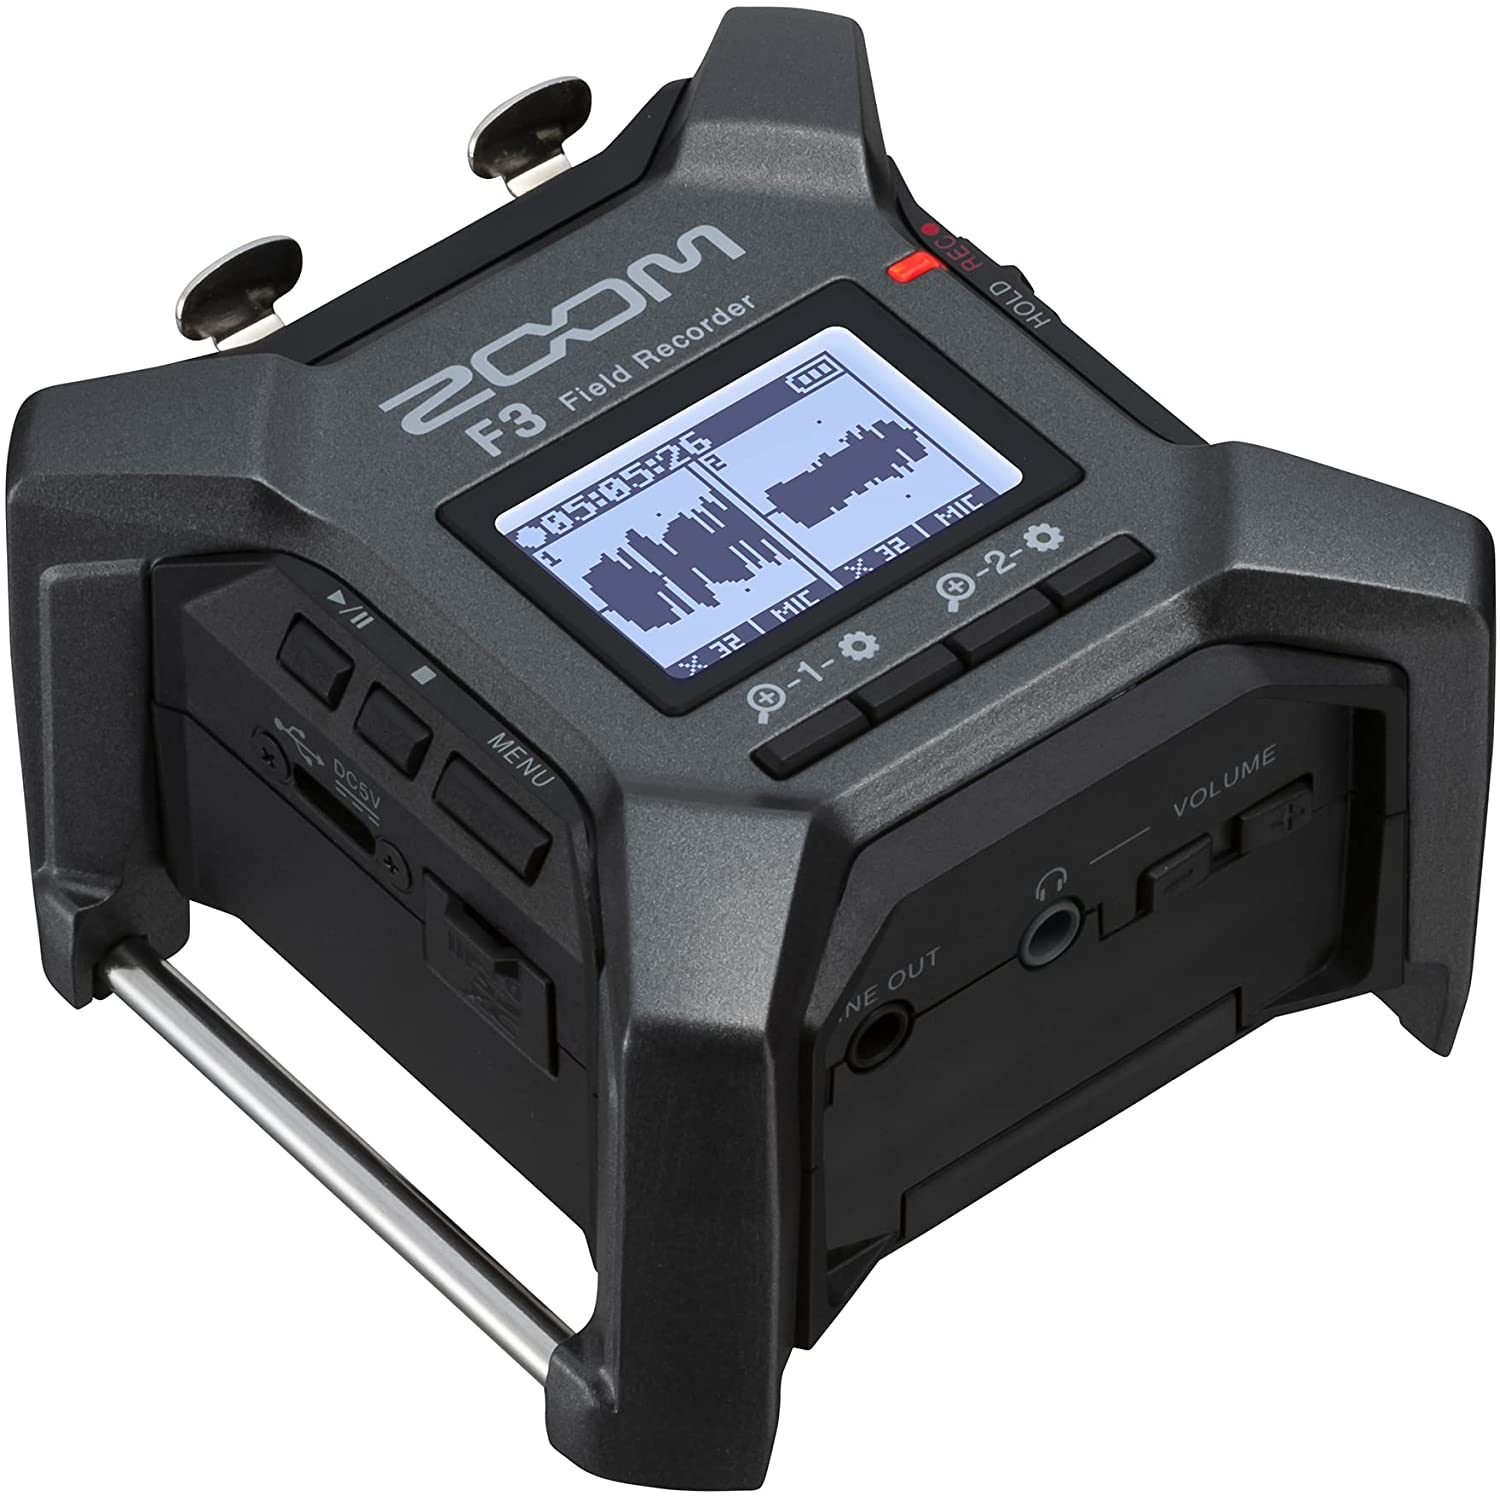 First look: Zoom F3 2-track 32-bit float recorder with 48 kHz sampling rate 58